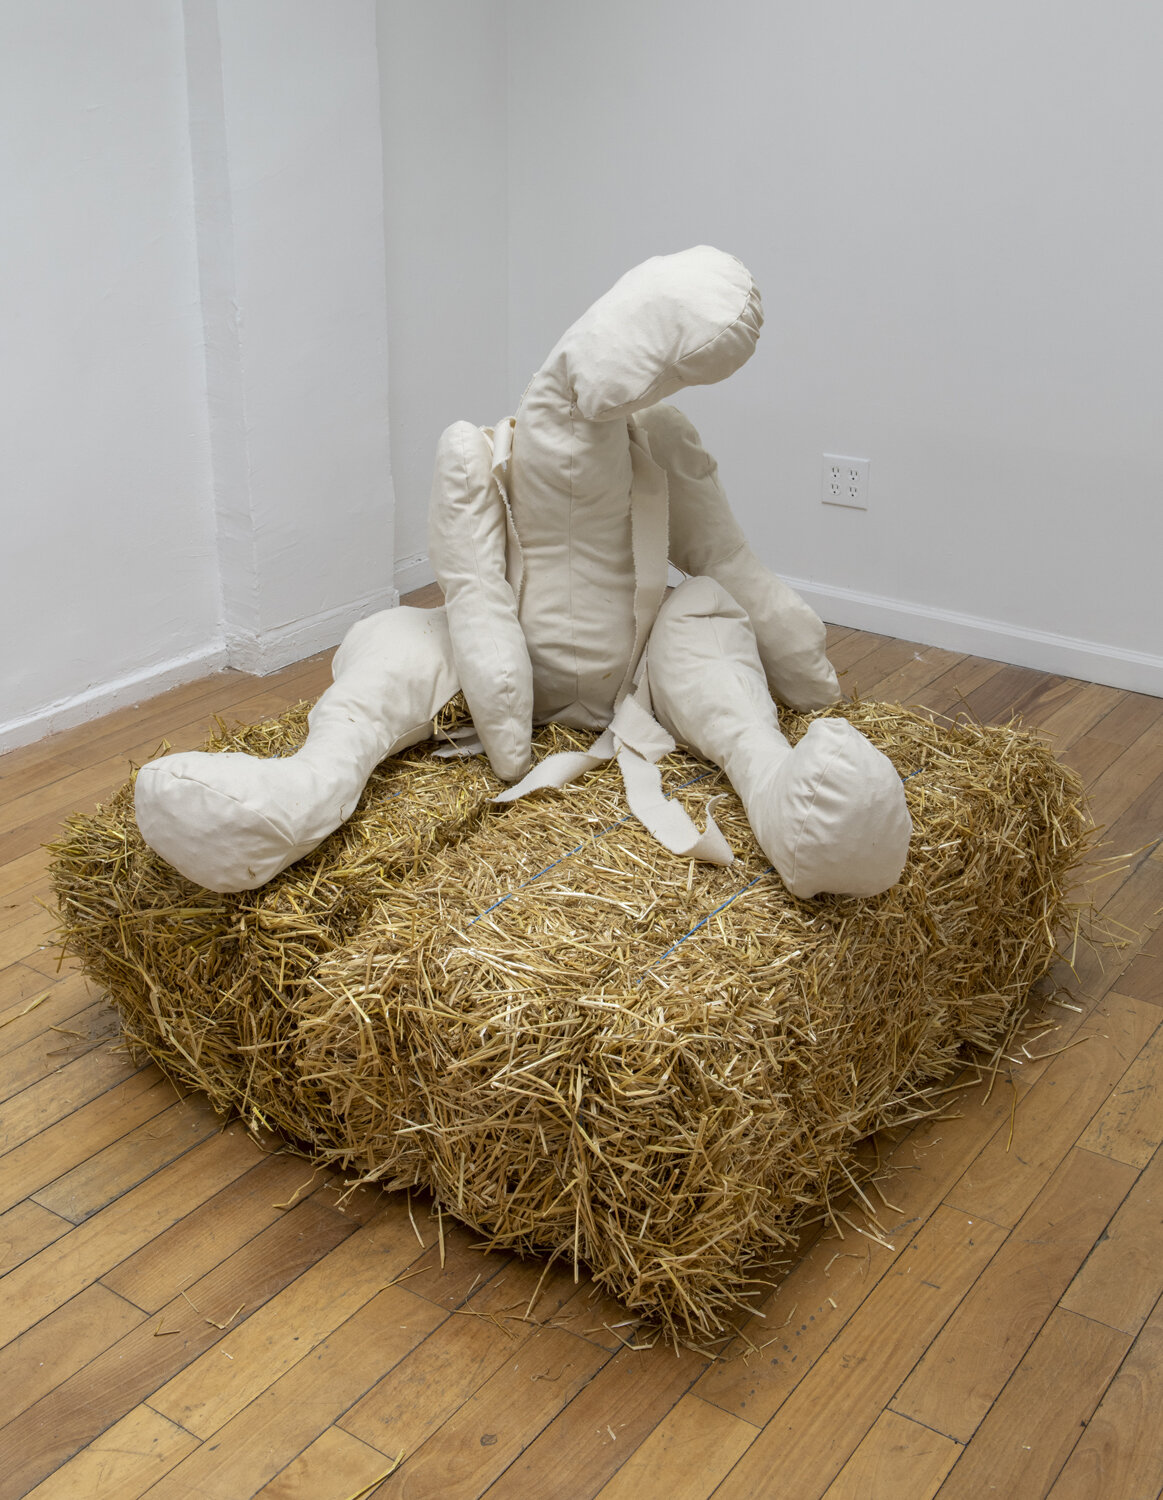   Straw Baby , 2019. Canvas and hay. 43 x 42 x 38 inches. 